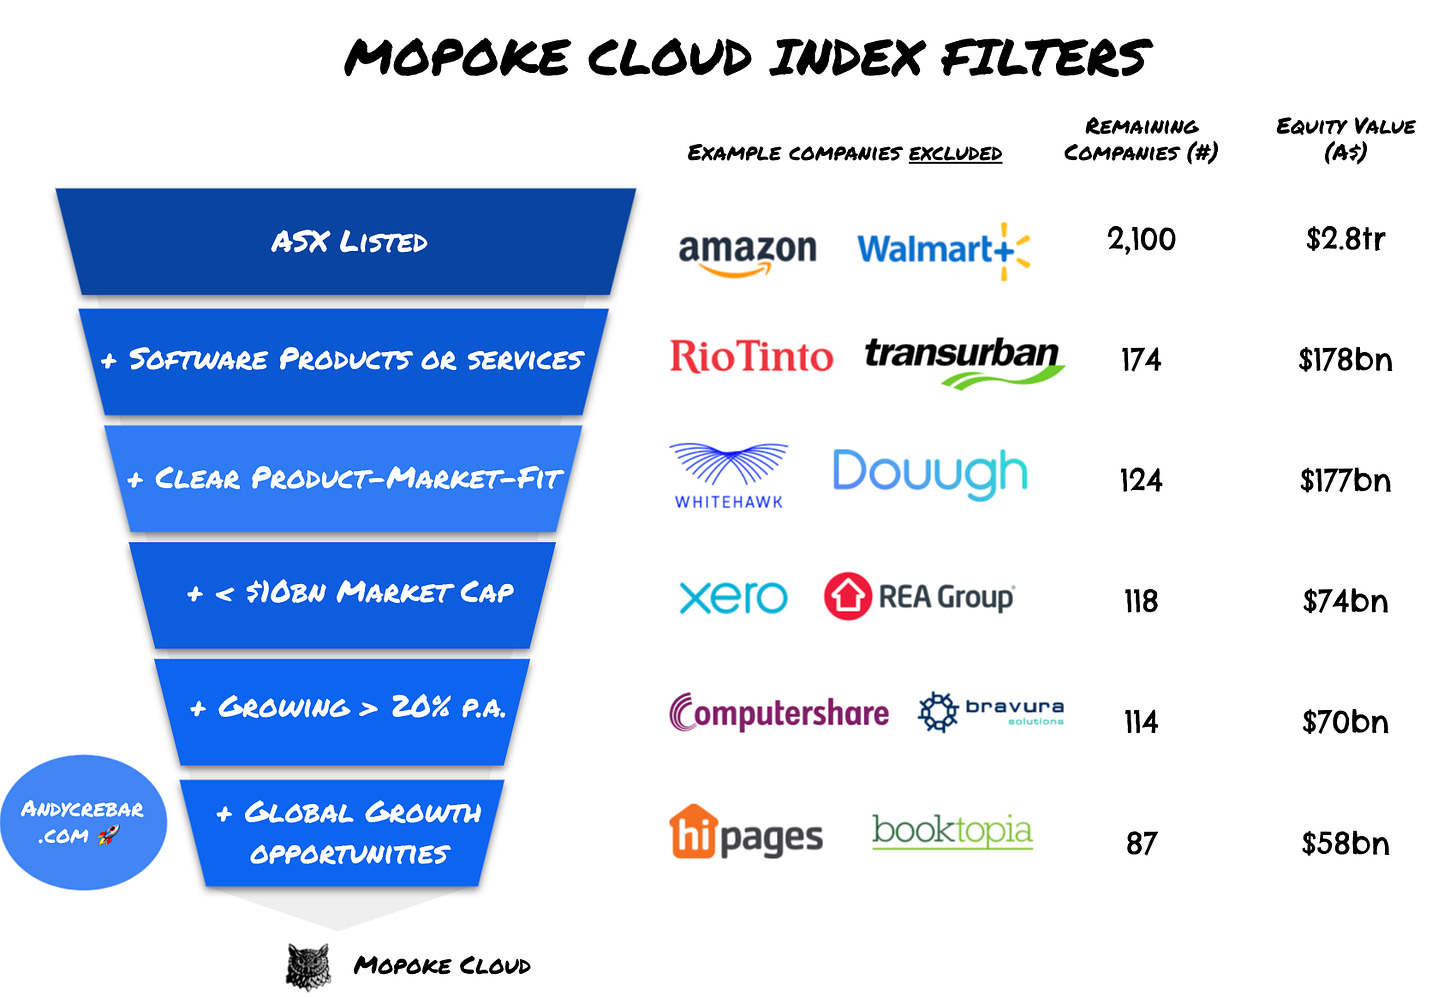 Mopooke cloud index filters of ASX companies for finding software companies with high global growth